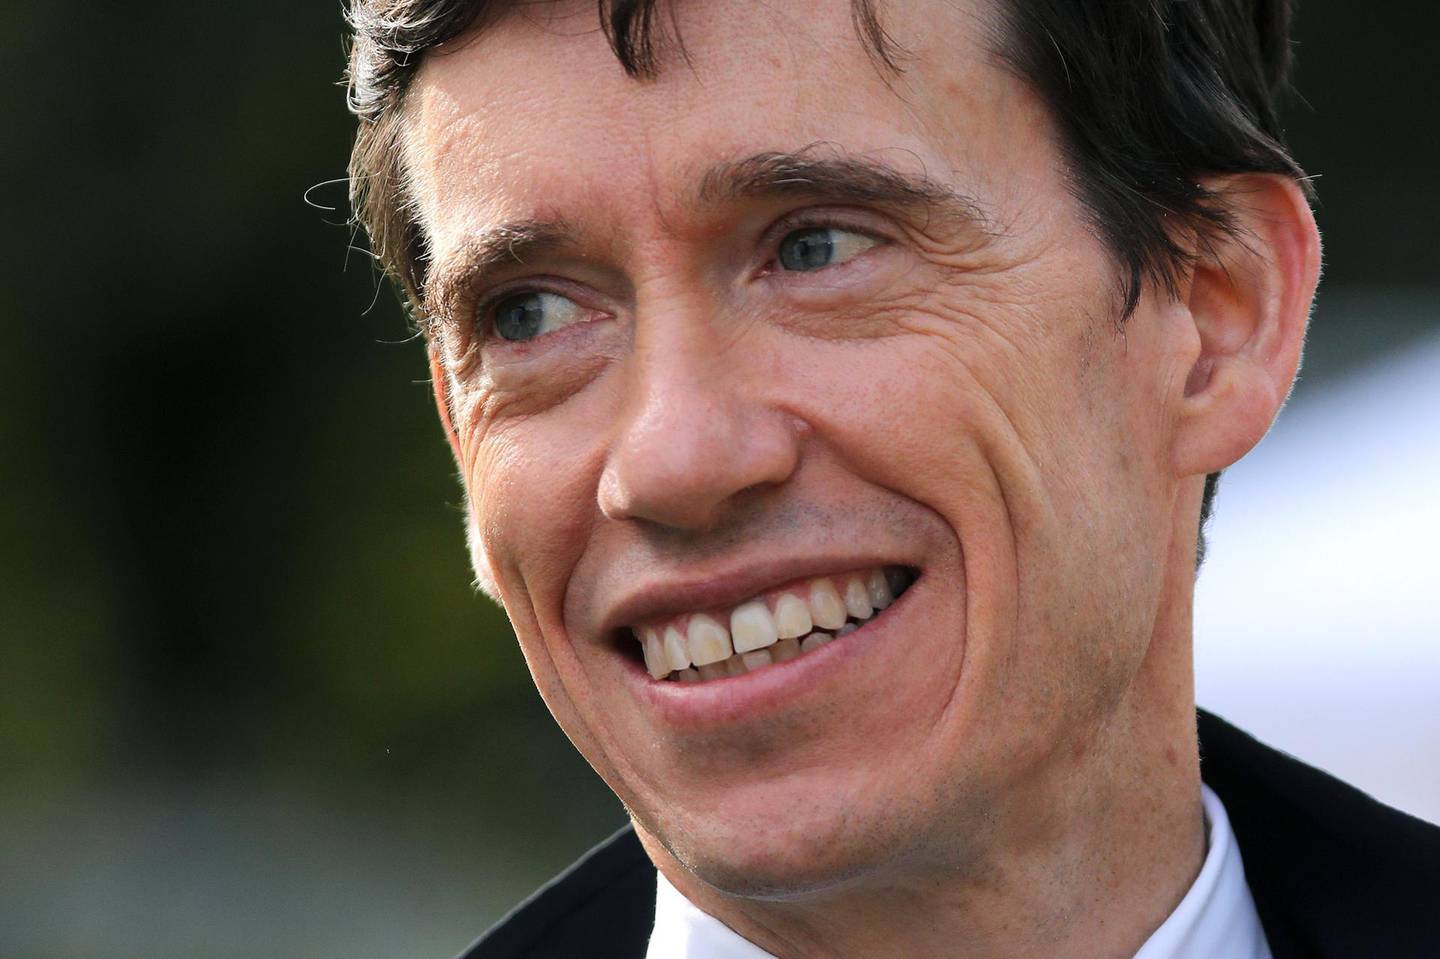 Expelled Conservative MP Rory Stewart walks through the temporary media broadcast centre on College Green, near the Houses of Parliament, in London central London on September 4, 2019. British Prime Minister Boris Johnson lost a crucial parliamentary vote on his Brexit strategy on Tuesday after members of his own Conservative Party voted against him, opening the way for possible early elections. The ruling Conservative party lost its working majority in parliament on Tuesday after one of its MPs switched to the anti-Brexit Liberal Democrats and, a few hours later, it expelled 21 MPs from the party for voting against the government. / AFP / ISABEL INFANTES
